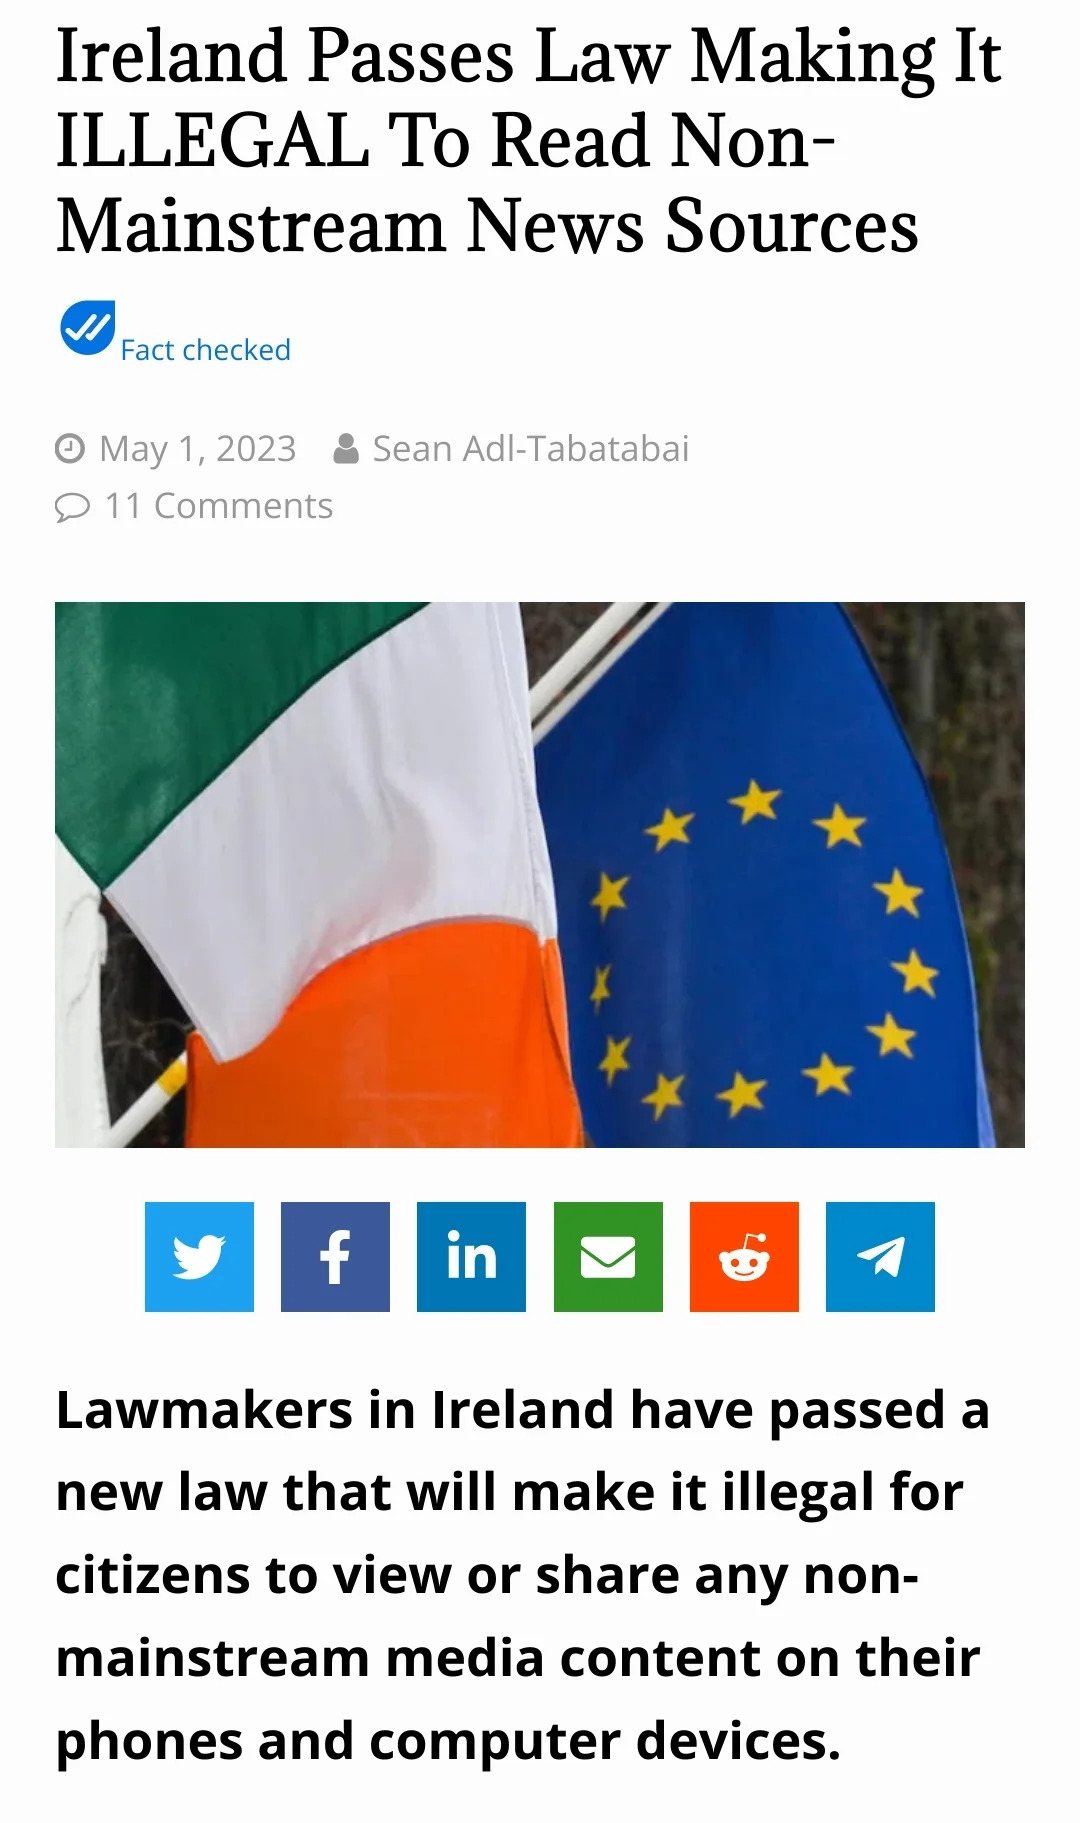 lawmakers-in-ireland-have-passed-a-new-law-that-will-make-v0-9gktd4y9zexa1.jpg